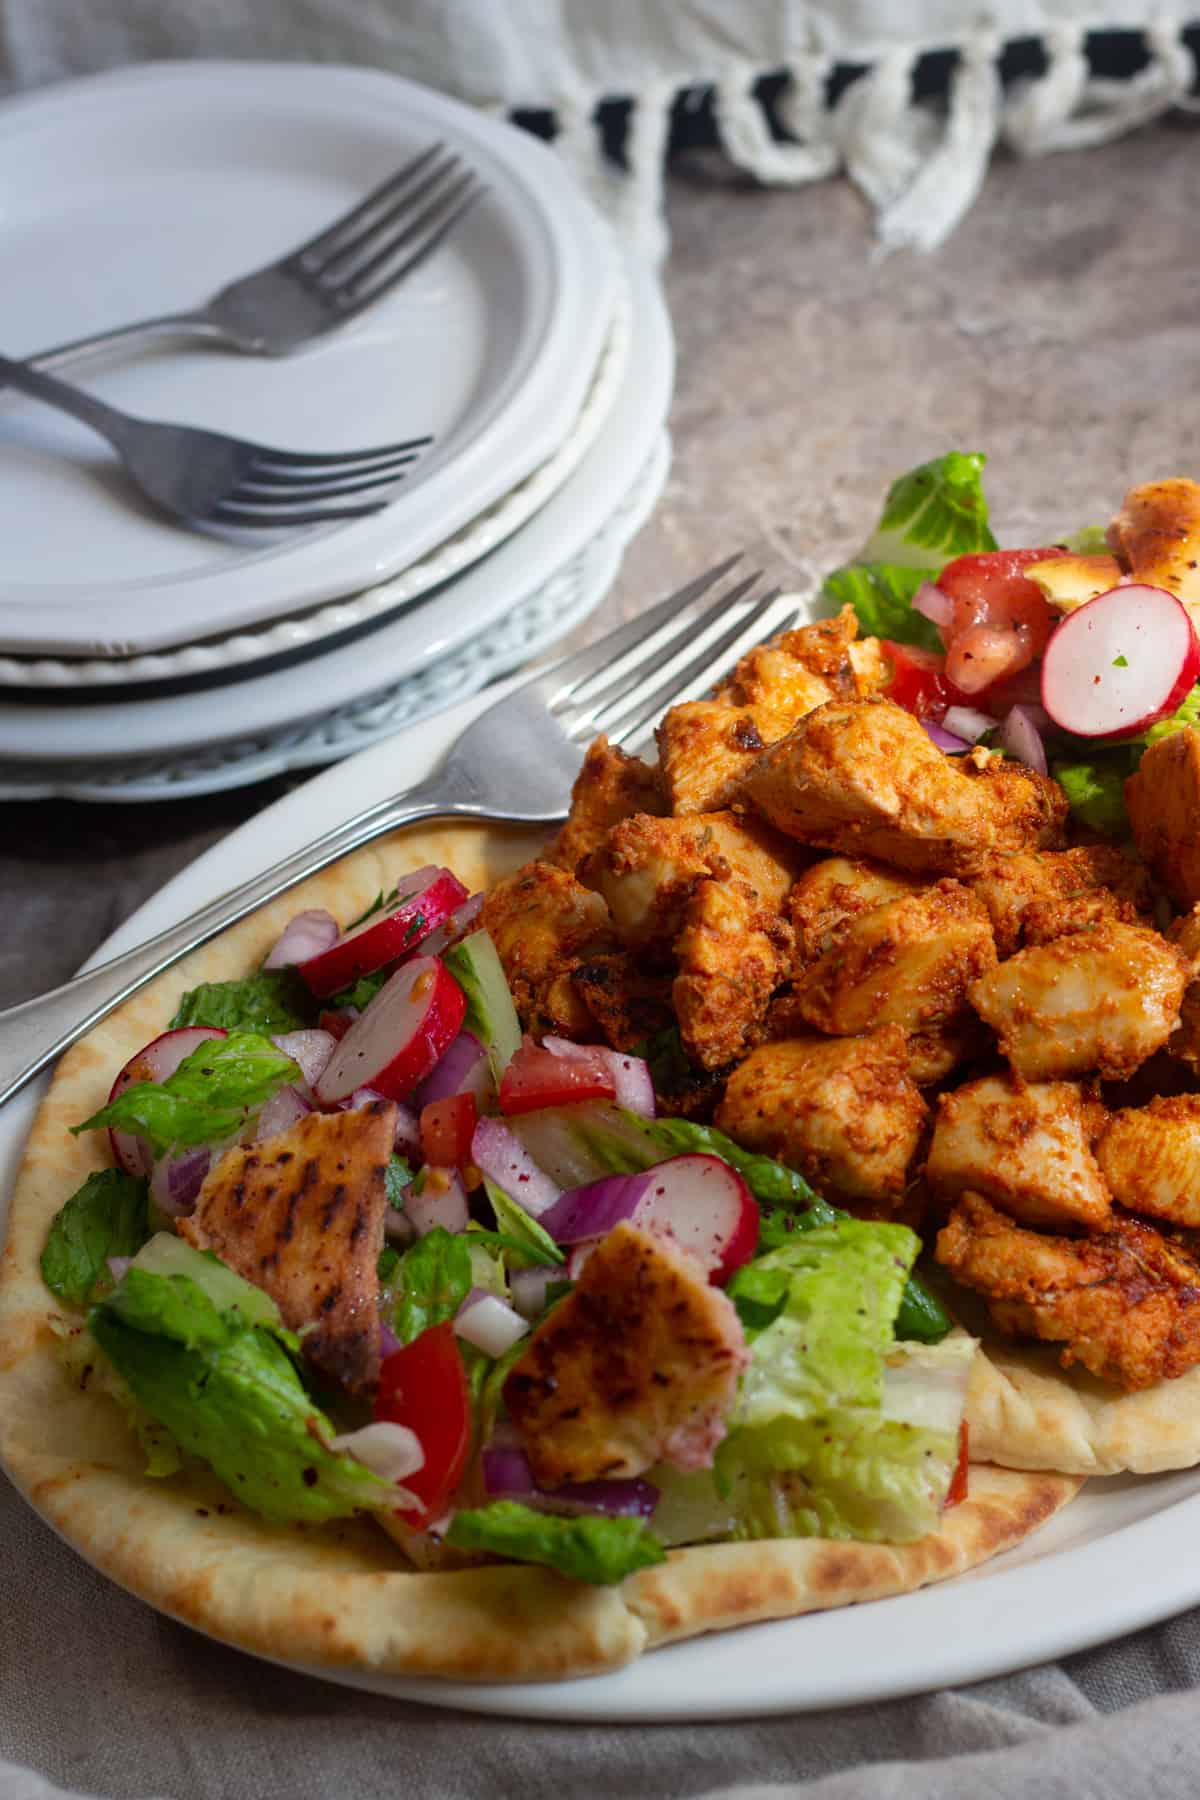 Shish tawook with salad and bread,